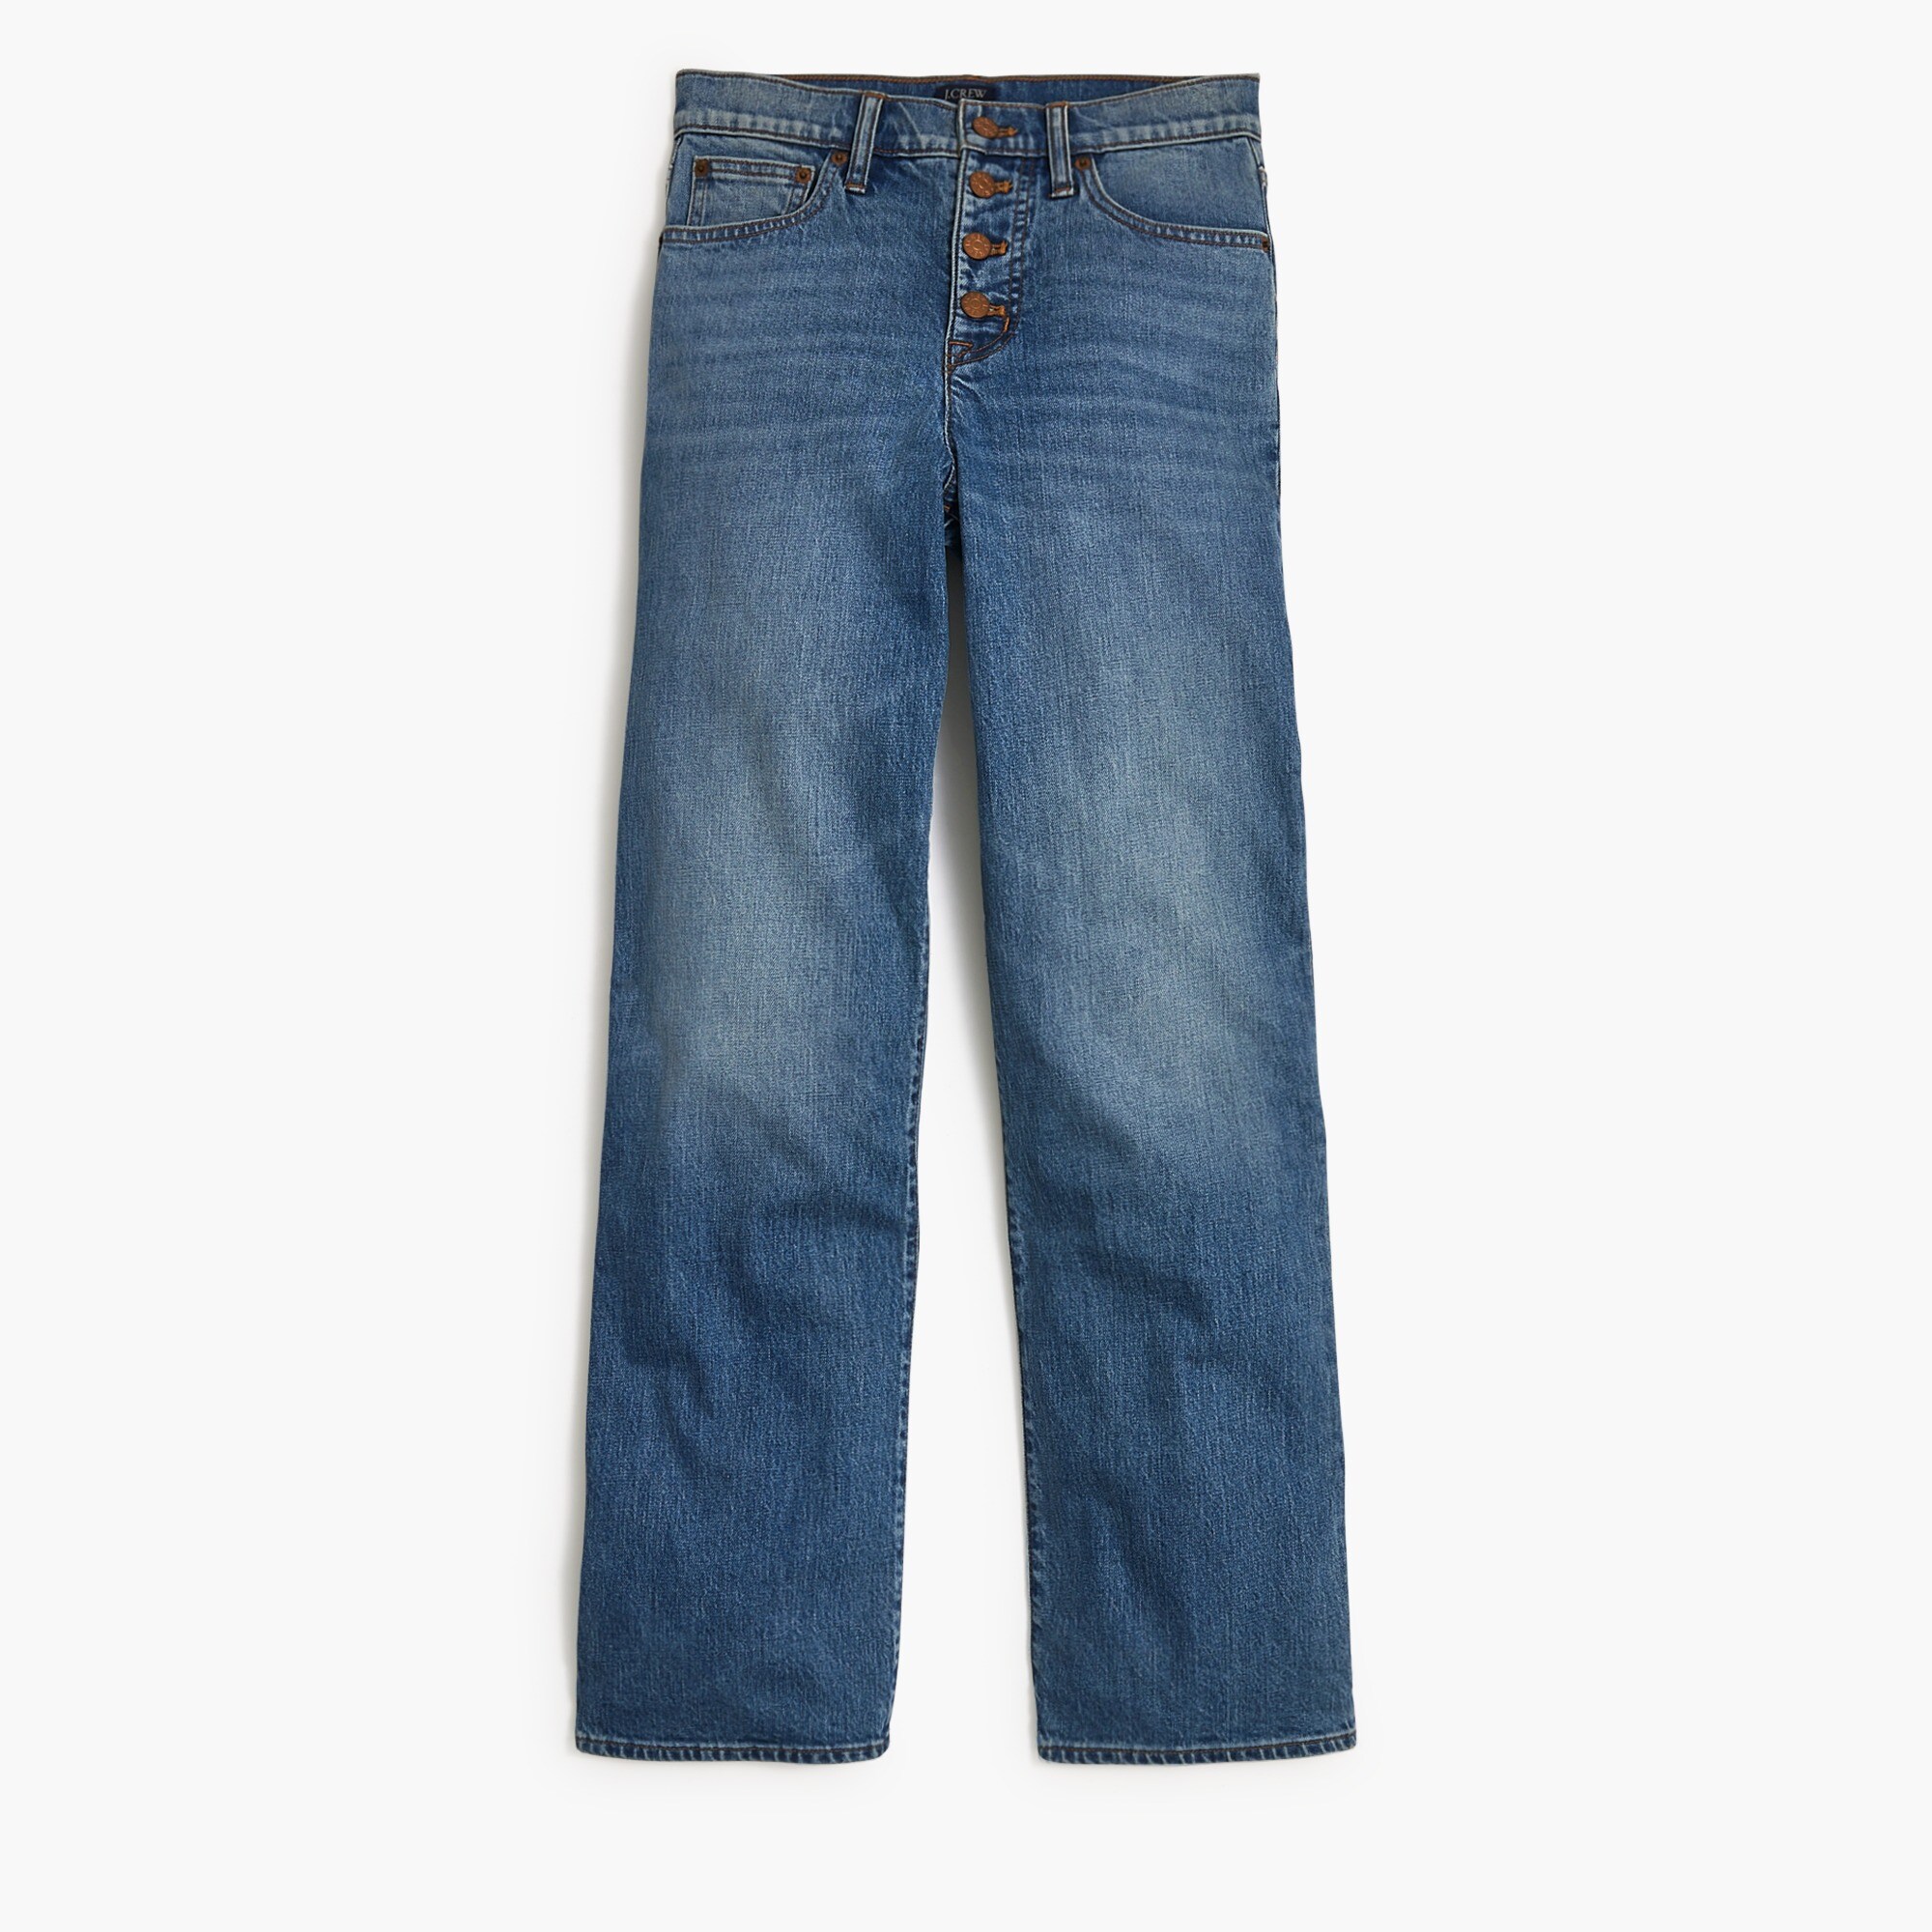  Wide-leg full-length jean in all-day stretch